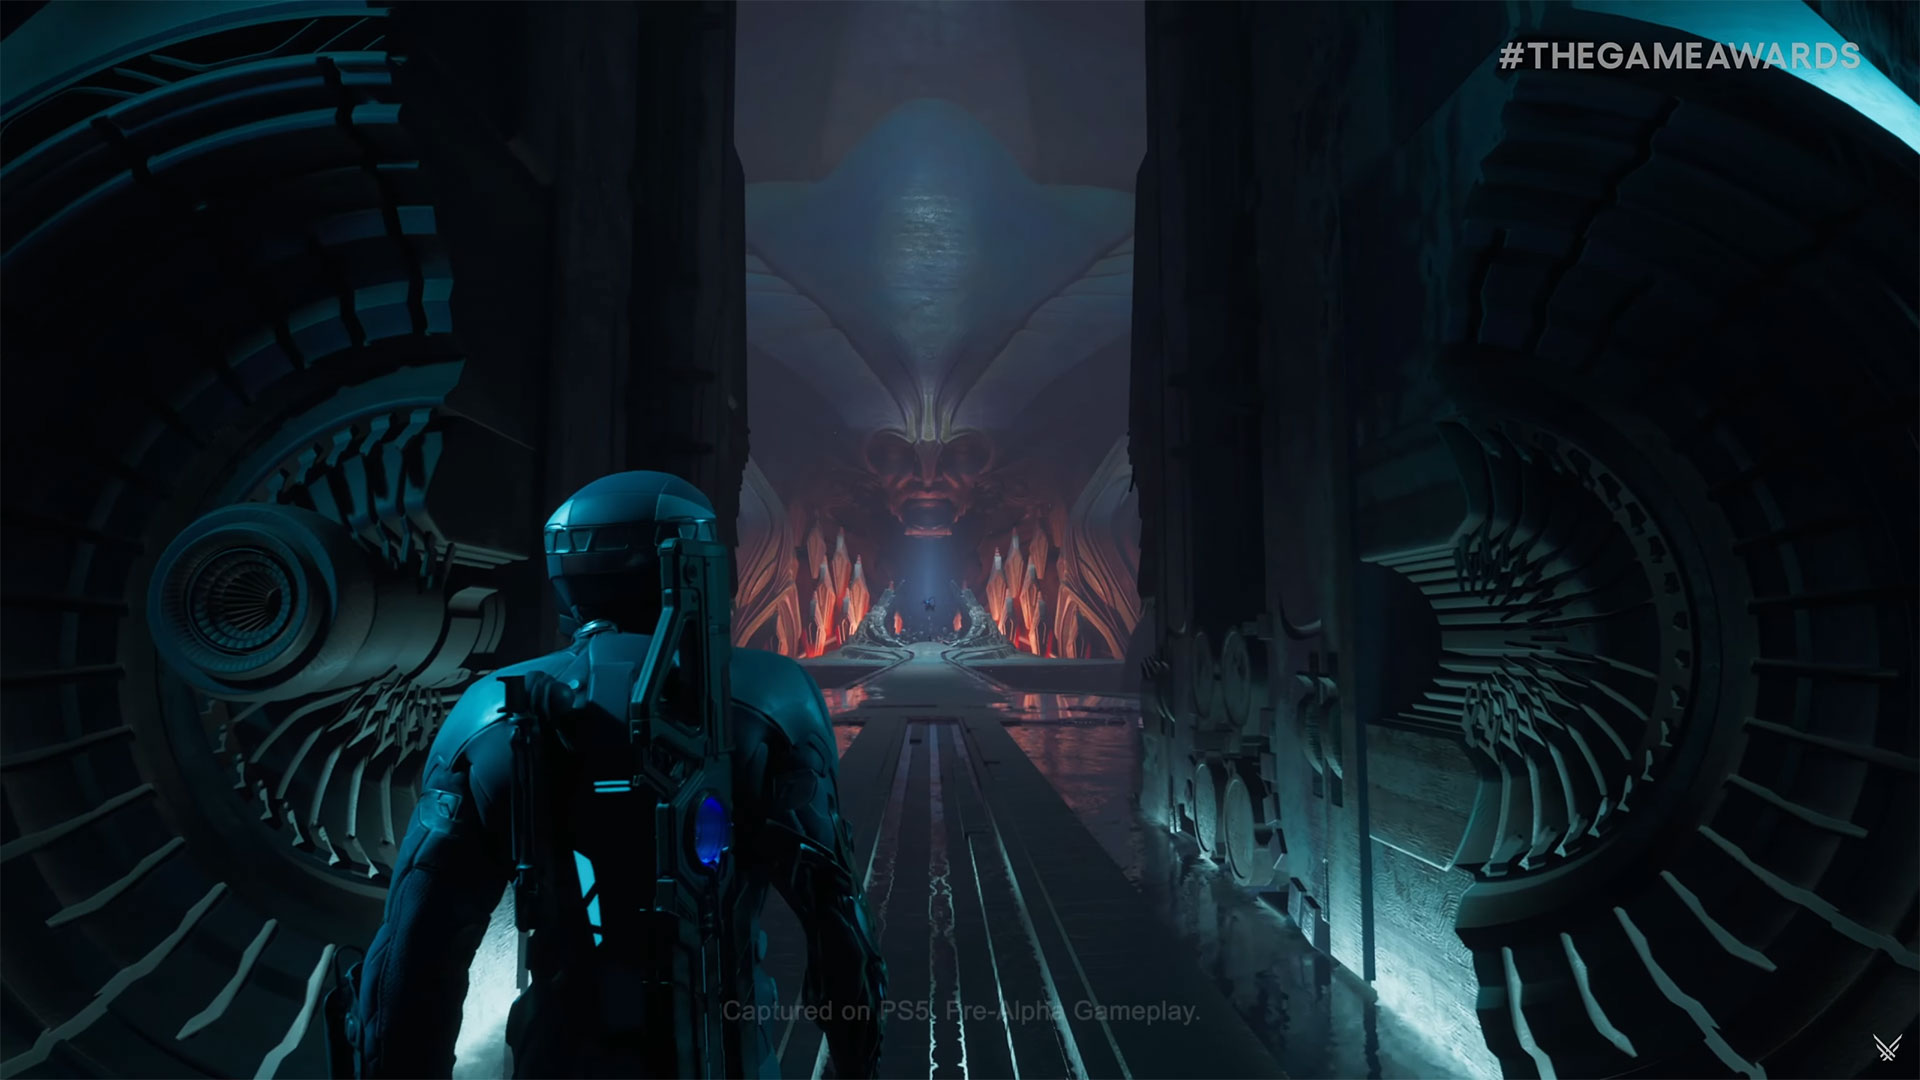 Exodus is an upcoming sci-fi action role-playing game from Archetype Entertainment